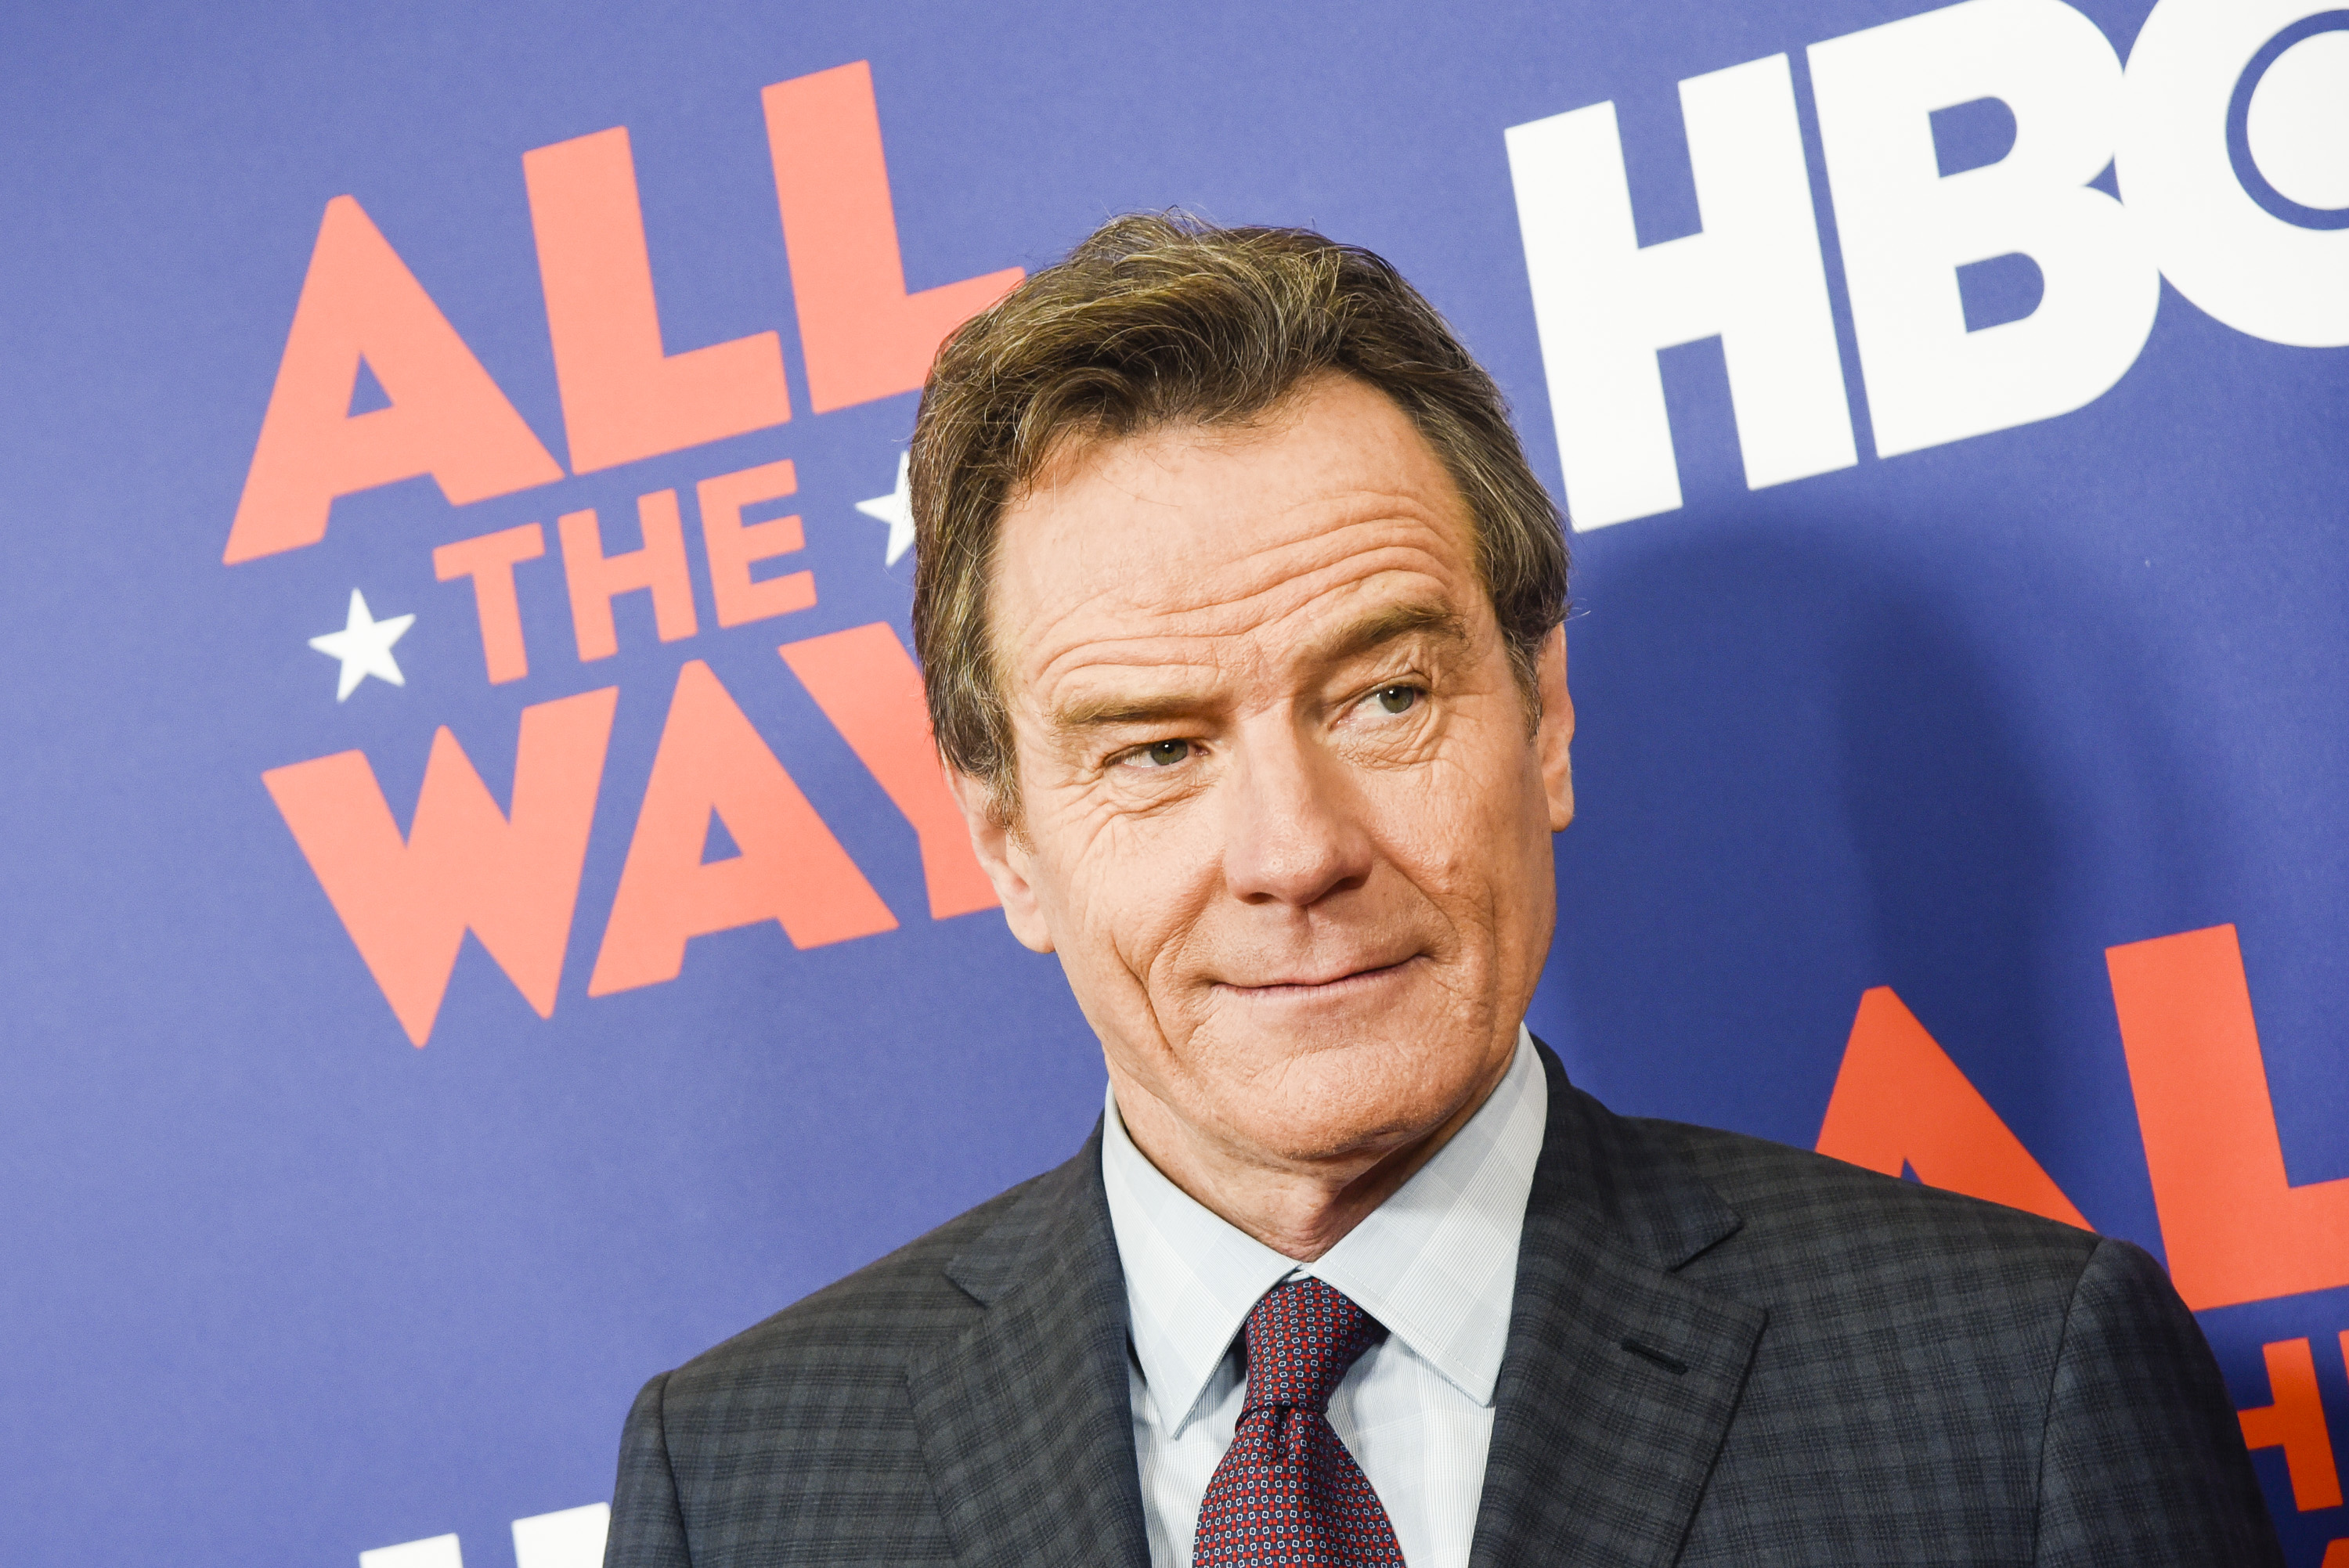 Actor Bryan Cranston poses for photographers during HBO's 